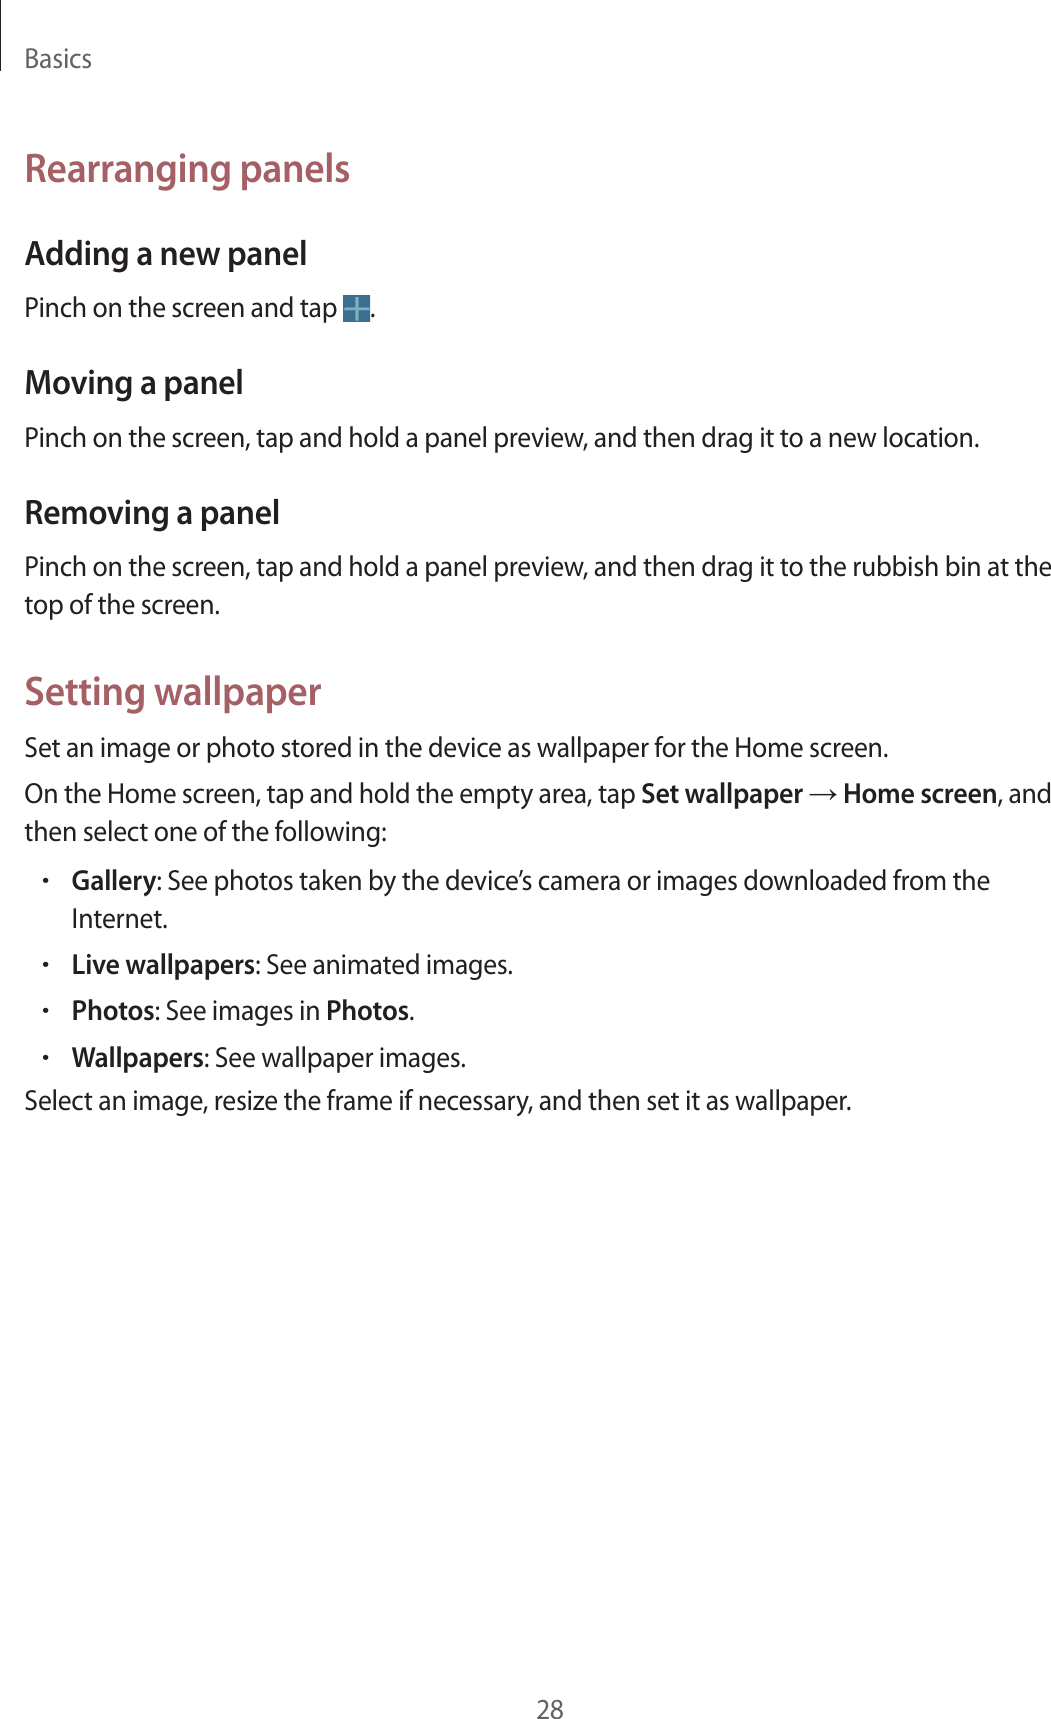 Basics28Rearranging panelsAdding a new panelPinch on the screen and tap  .Moving a panelPinch on the screen, tap and hold a panel preview, and then drag it to a new location.Removing a panelPinch on the screen, tap and hold a panel preview, and then drag it to the rubbish bin at the top of the screen.Setting wallpaperSet an image or photo stored in the device as wallpaper for the Home screen.On the Home screen, tap and hold the empty area, tap Set wallpaper → Home screen, and then select one of the following:•Gallery: See photos taken by the device’s camera or images downloaded from the Internet.•Live wallpapers: See animated images.•Photos: See images in Photos.•Wallpapers: See wallpaper images.Select an image, resize the frame if necessary, and then set it as wallpaper.